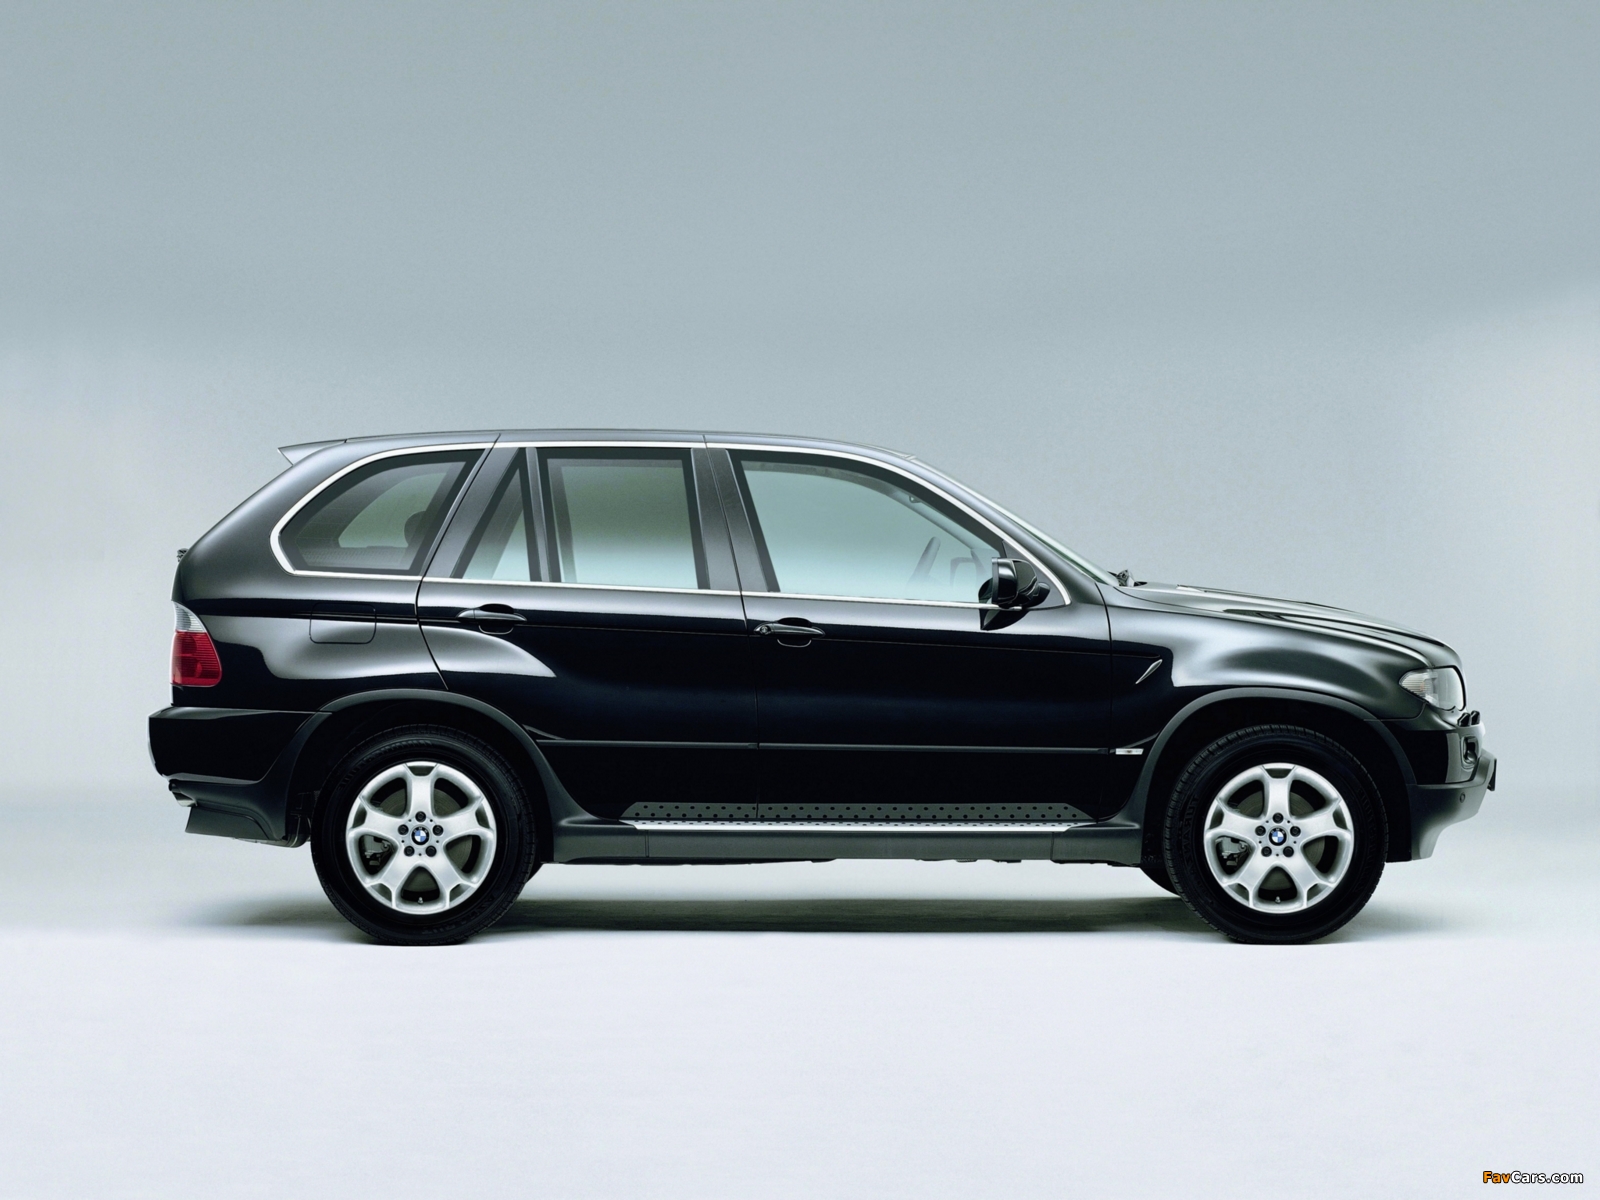 Wallpaper Of Bmw X5 Security E53